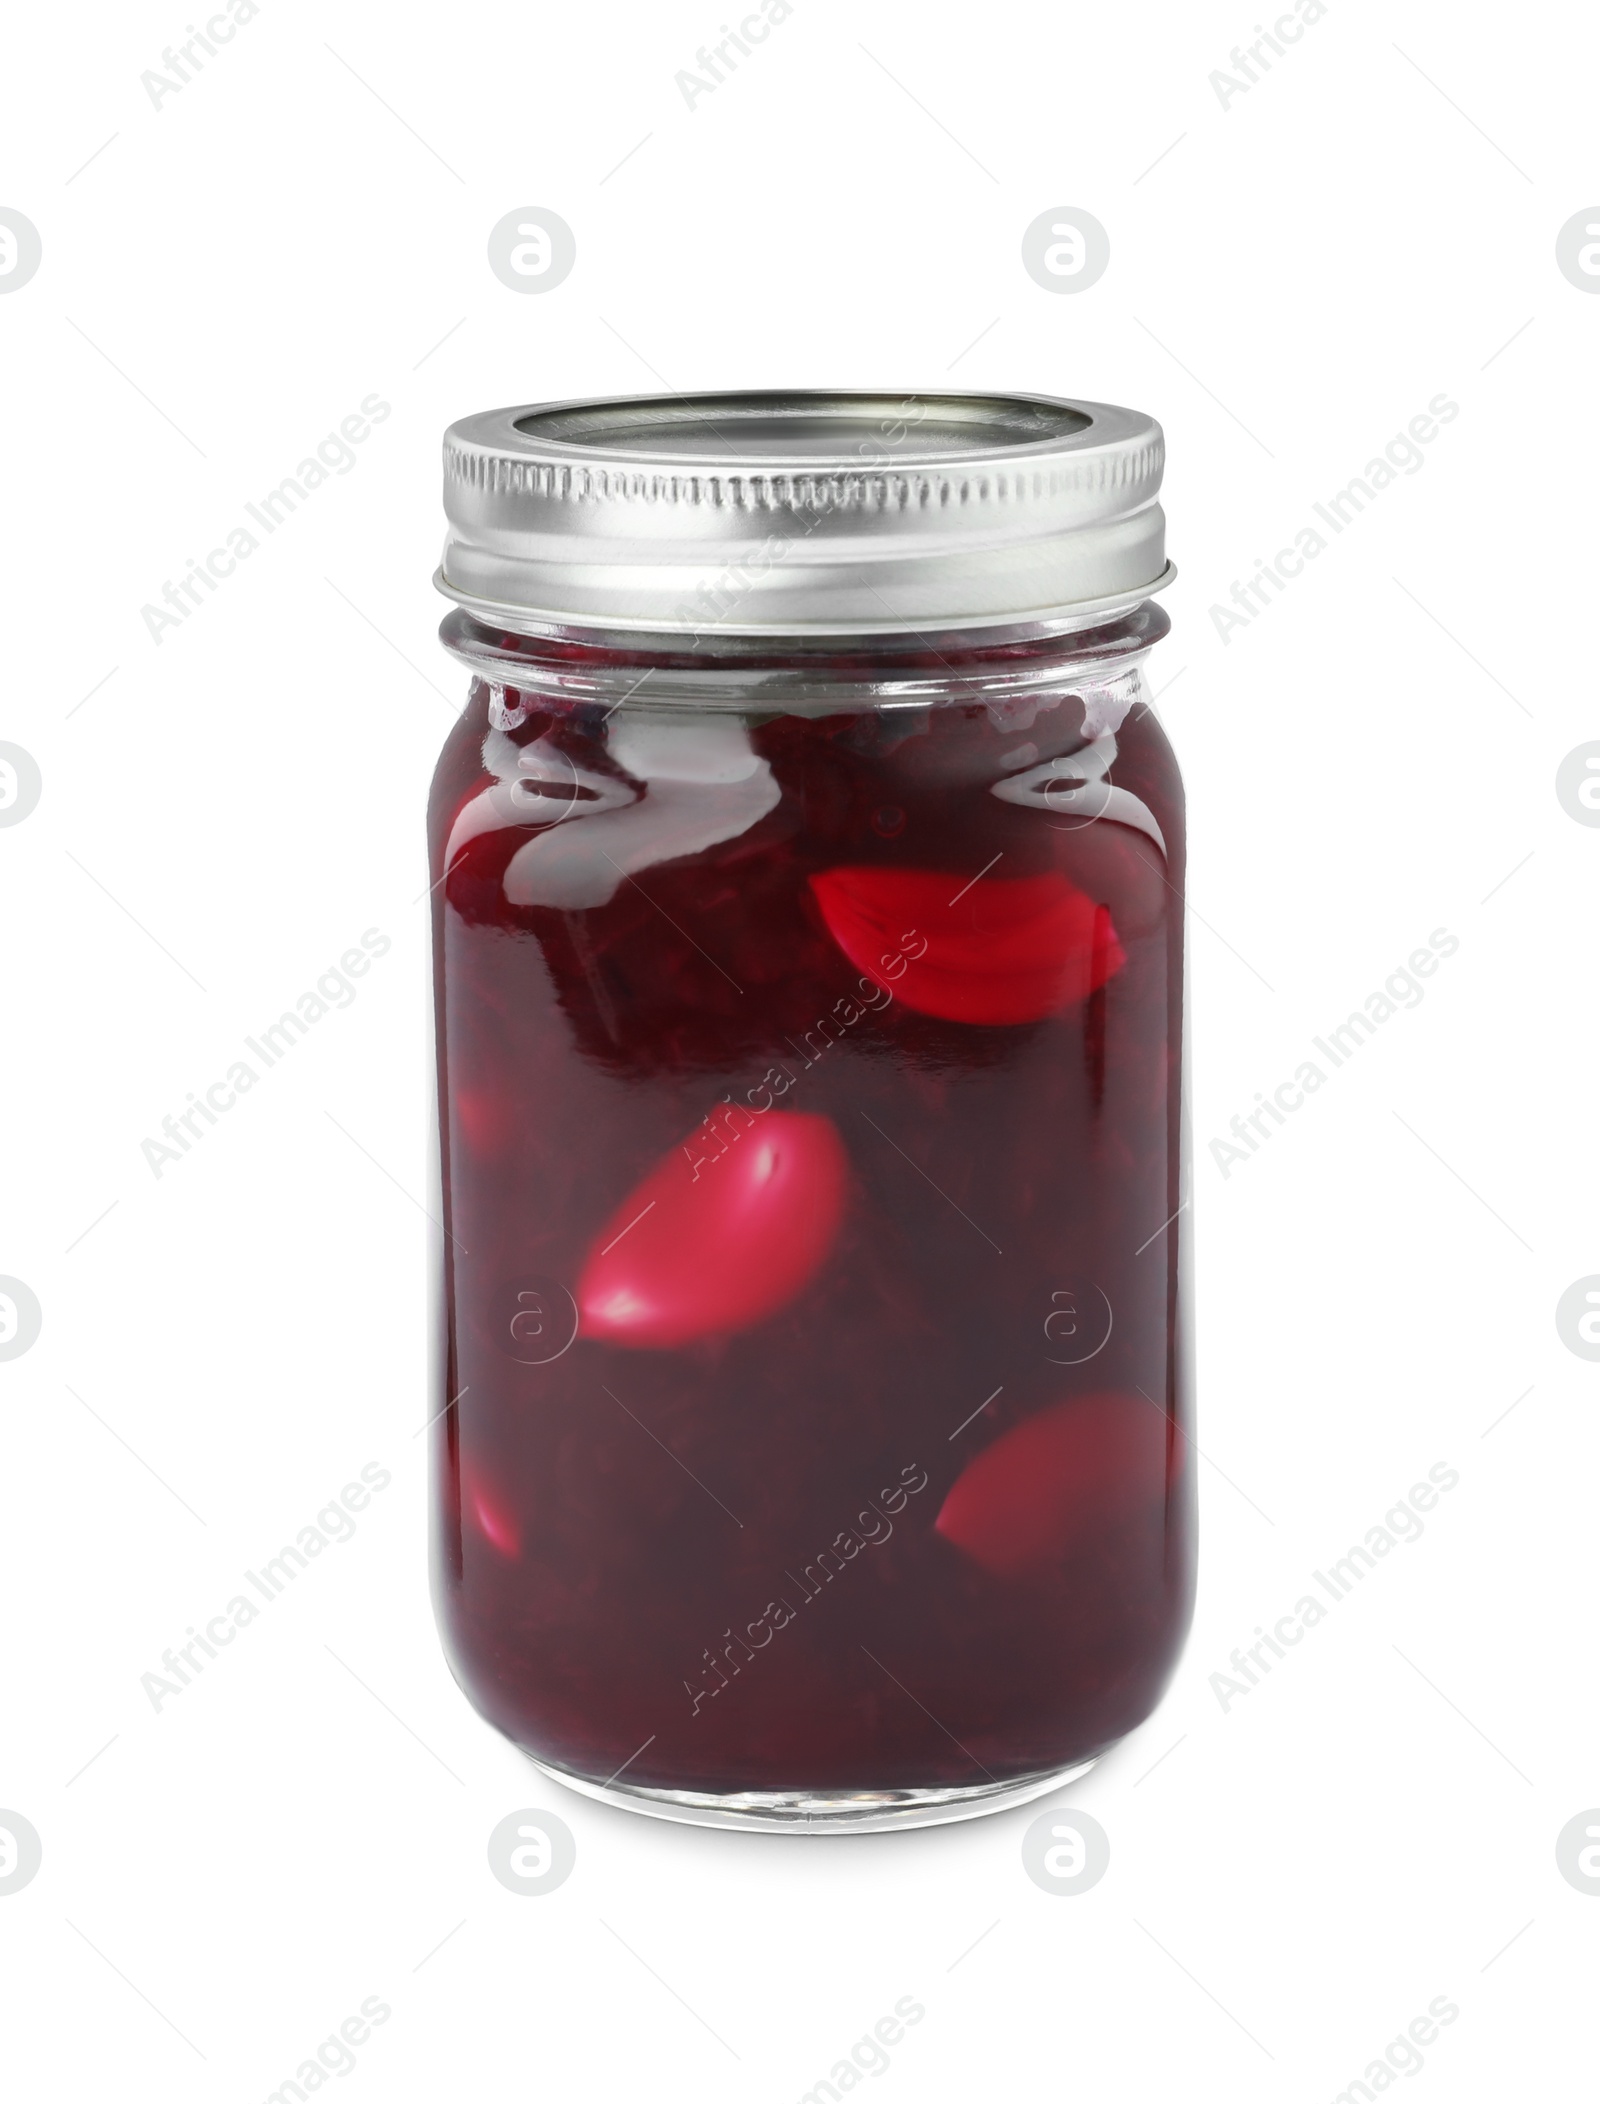 Photo of Pickled beets in glass jar isolated on white